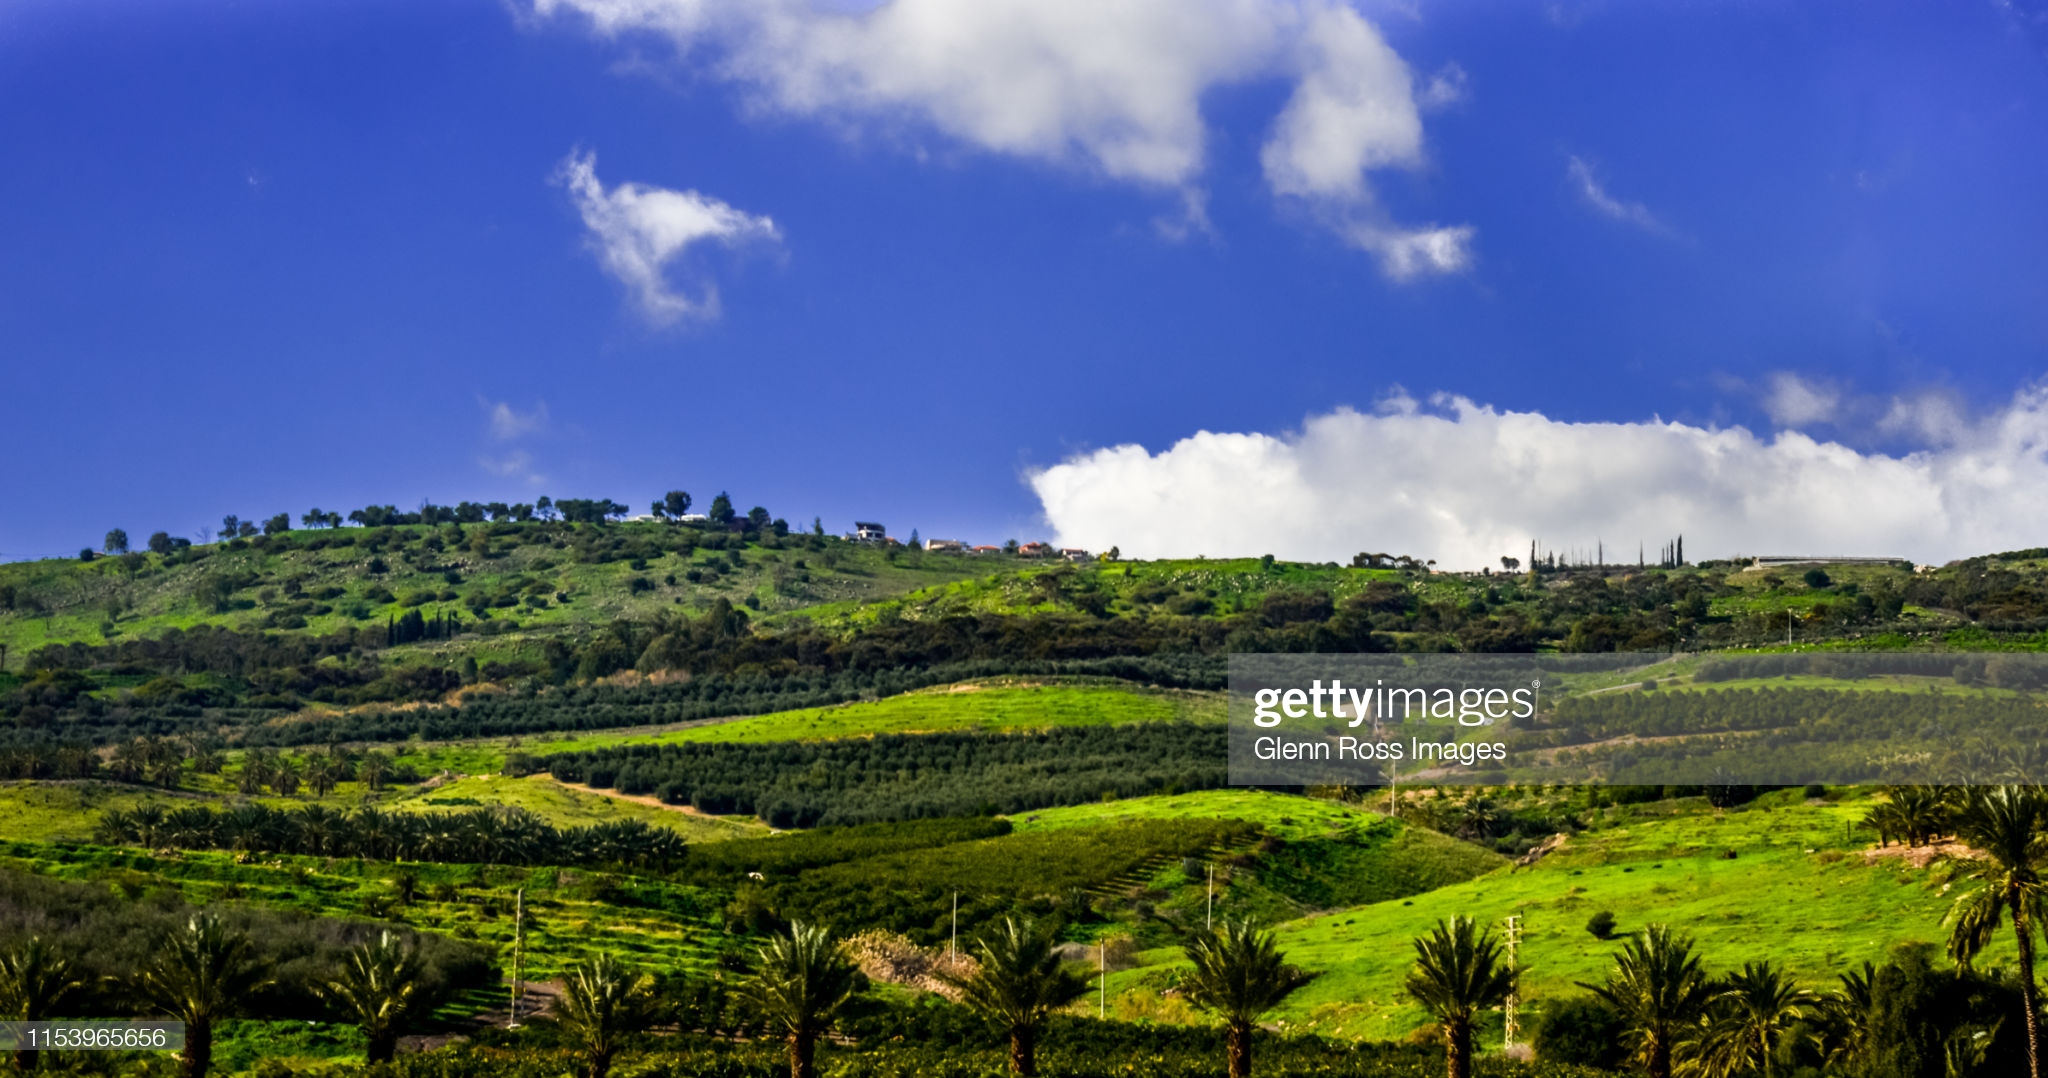 green-hills-of-northern-israel-picture-id1153965656